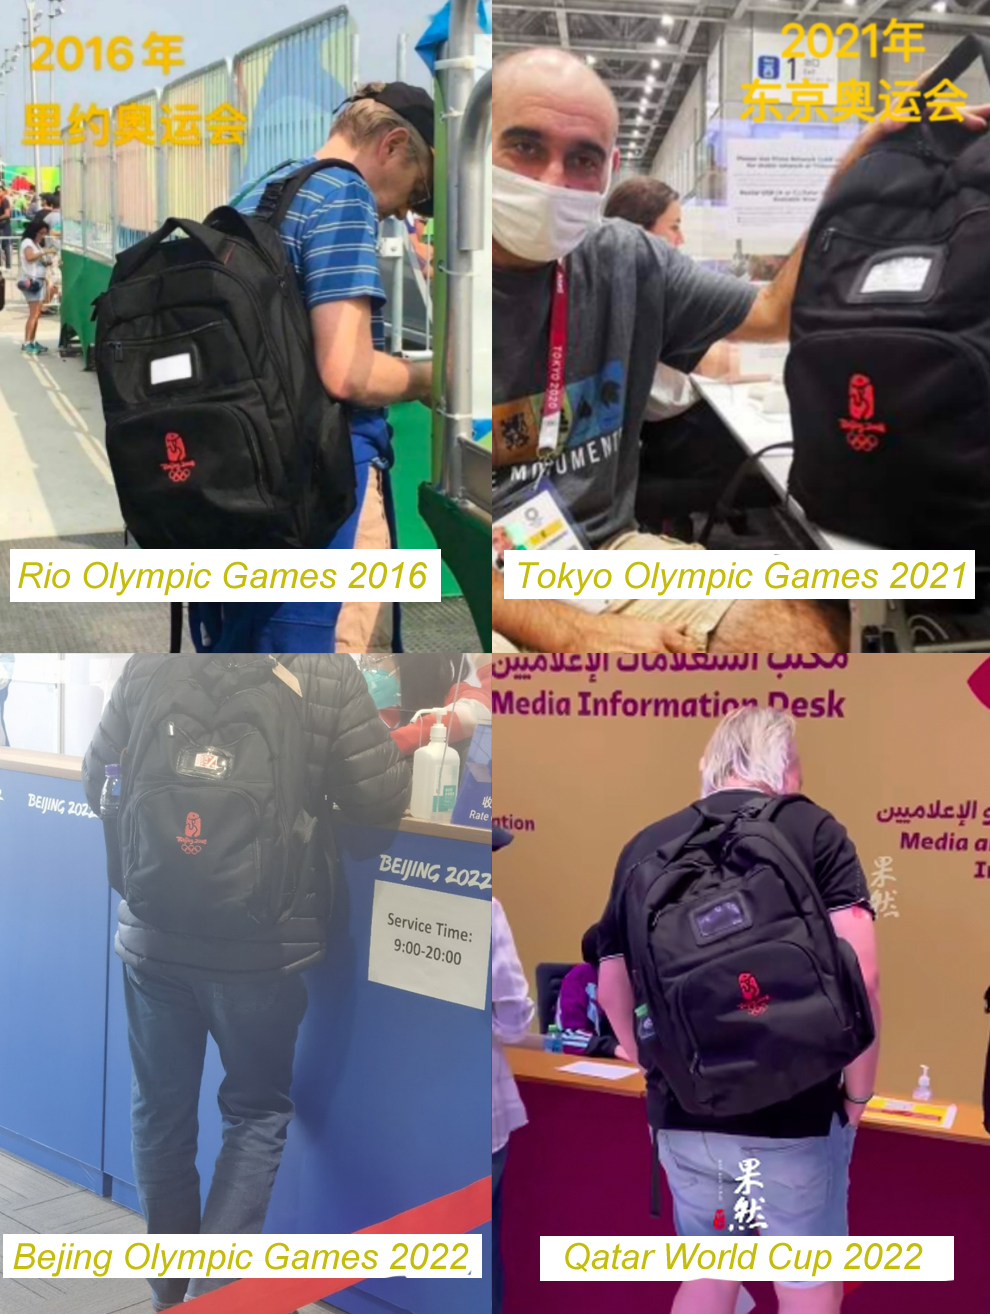 The backpack of FIFA World Cup Qatar 2022